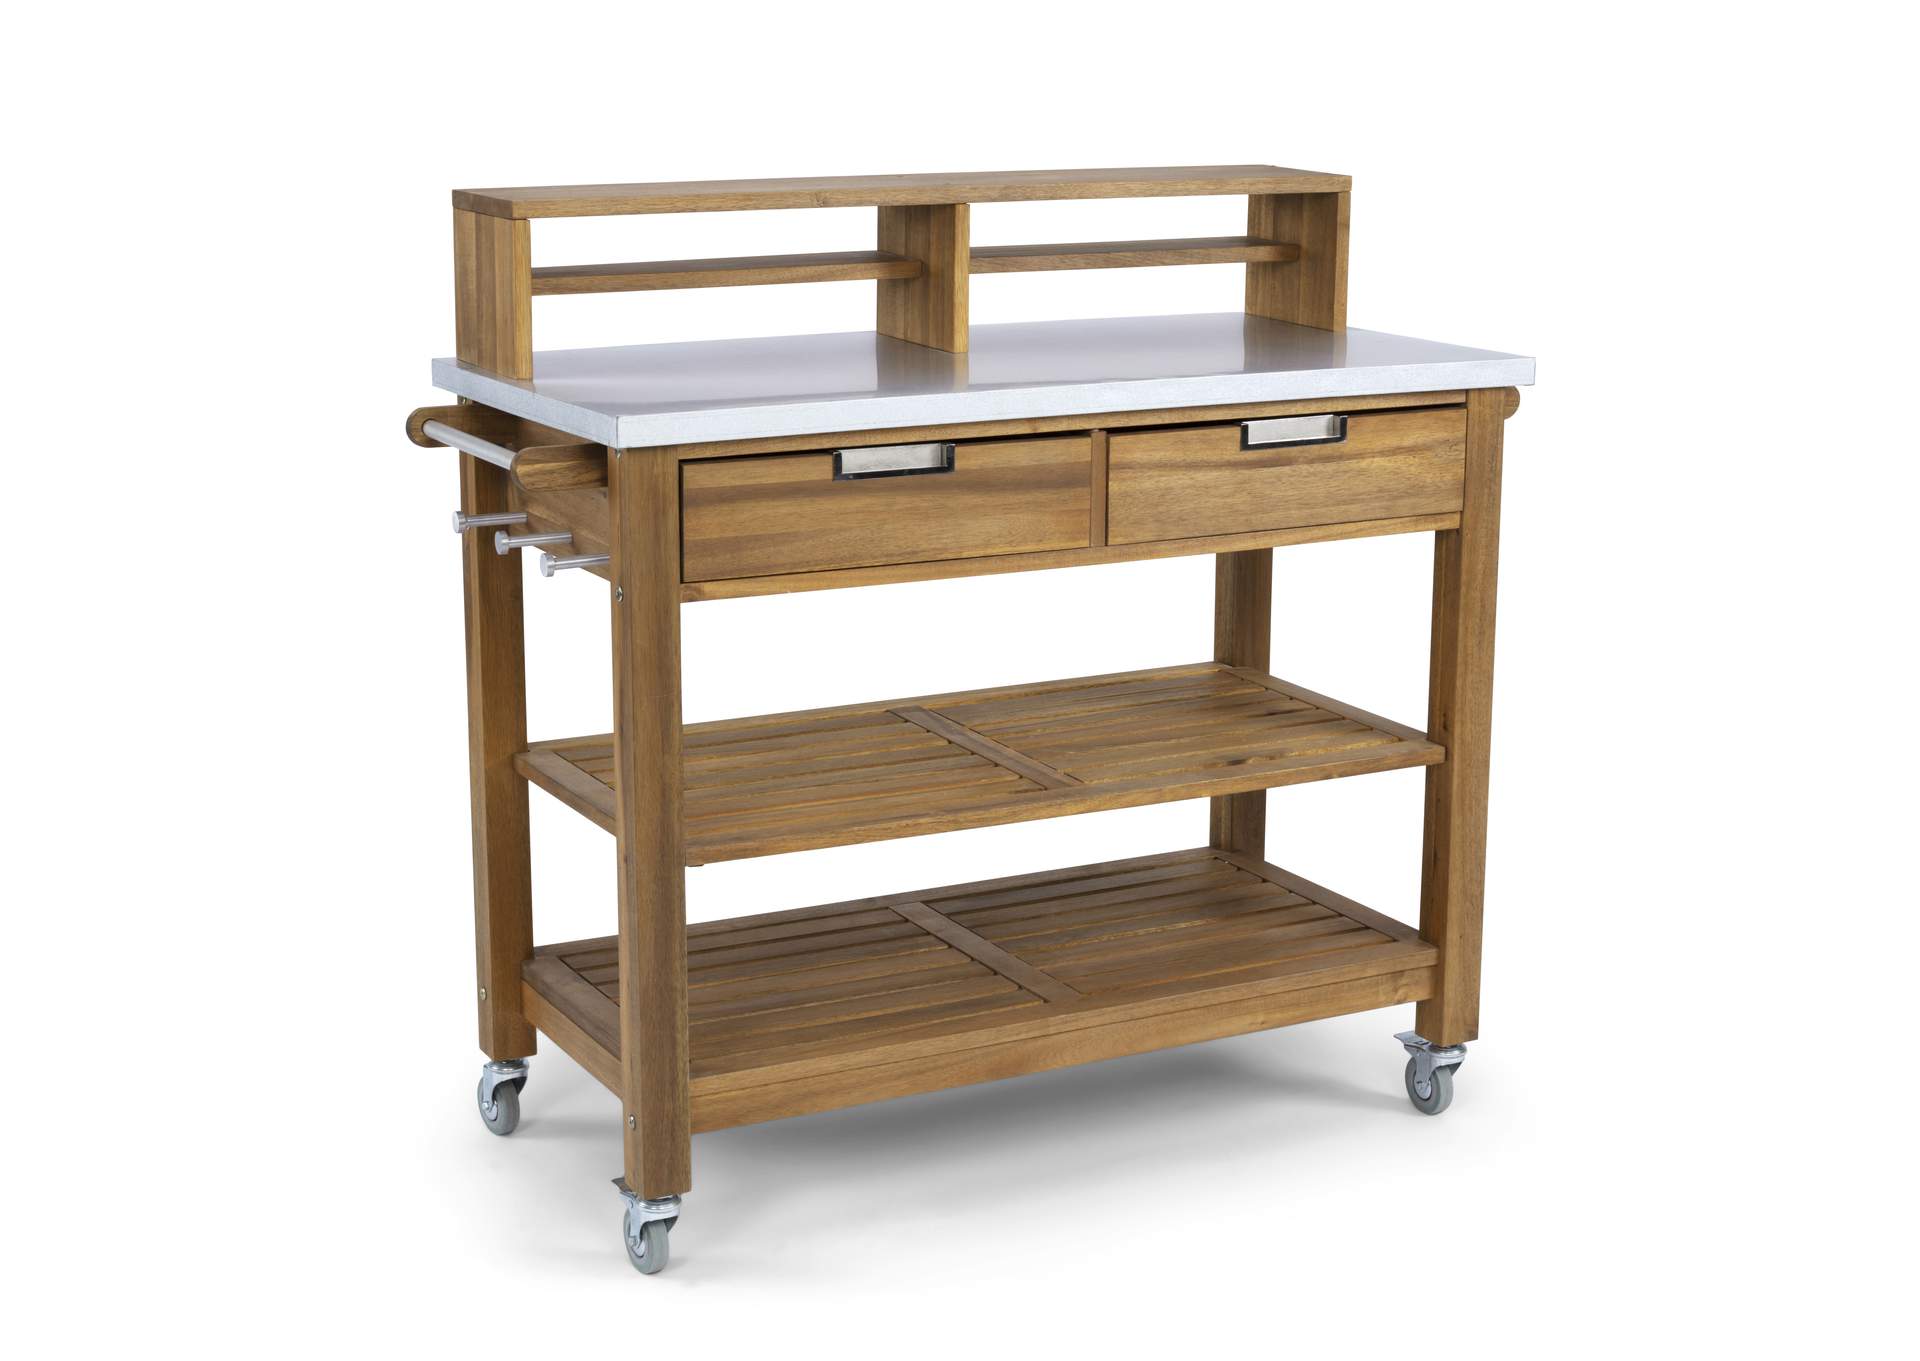 Maho Potting Bench By Homestyles,Homestyles